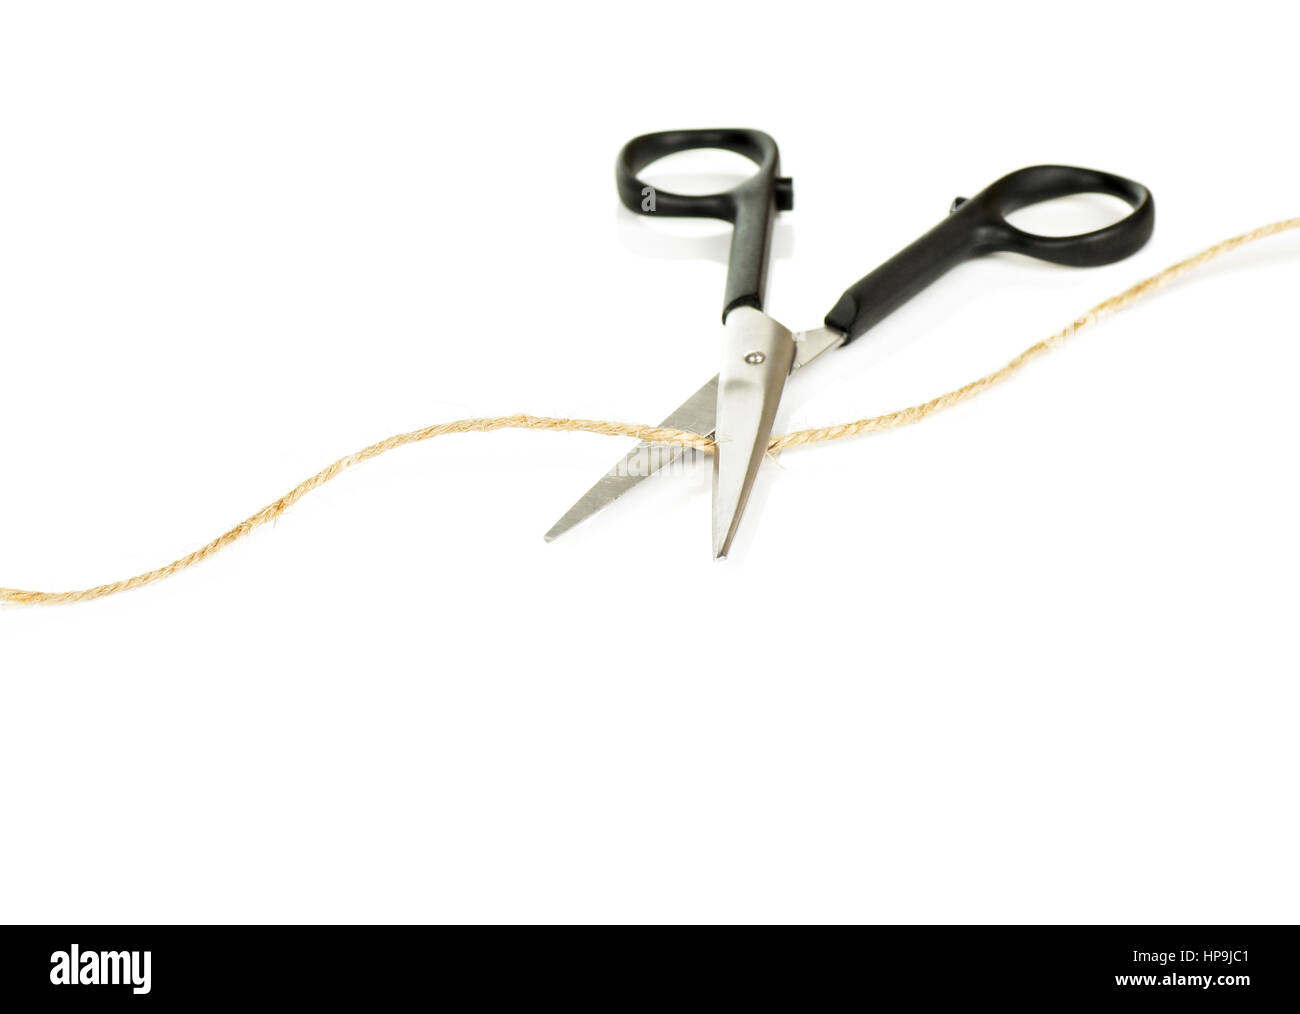 Pair of Scissors Cutting a Length of Brown String Isolated on White Background Stock Photo